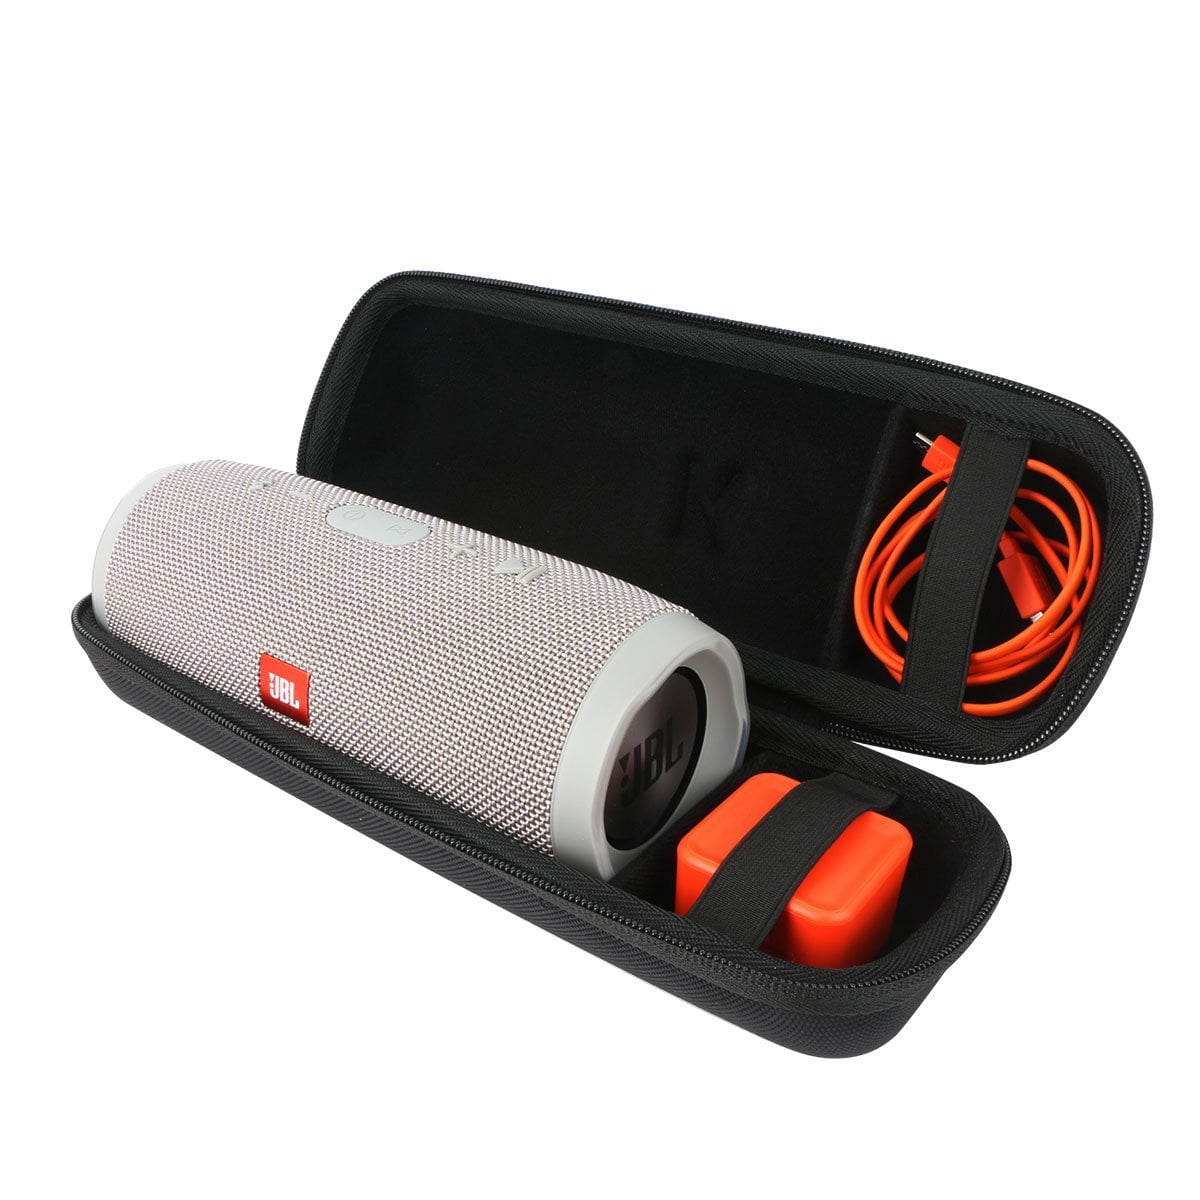 Seminar Korn Glatte Carrying Case For JBL Charge 3 Waterproof Portable Wireless Bluetooth  Speaker. Extra Room For Charger and USB Cable - Walmart.com